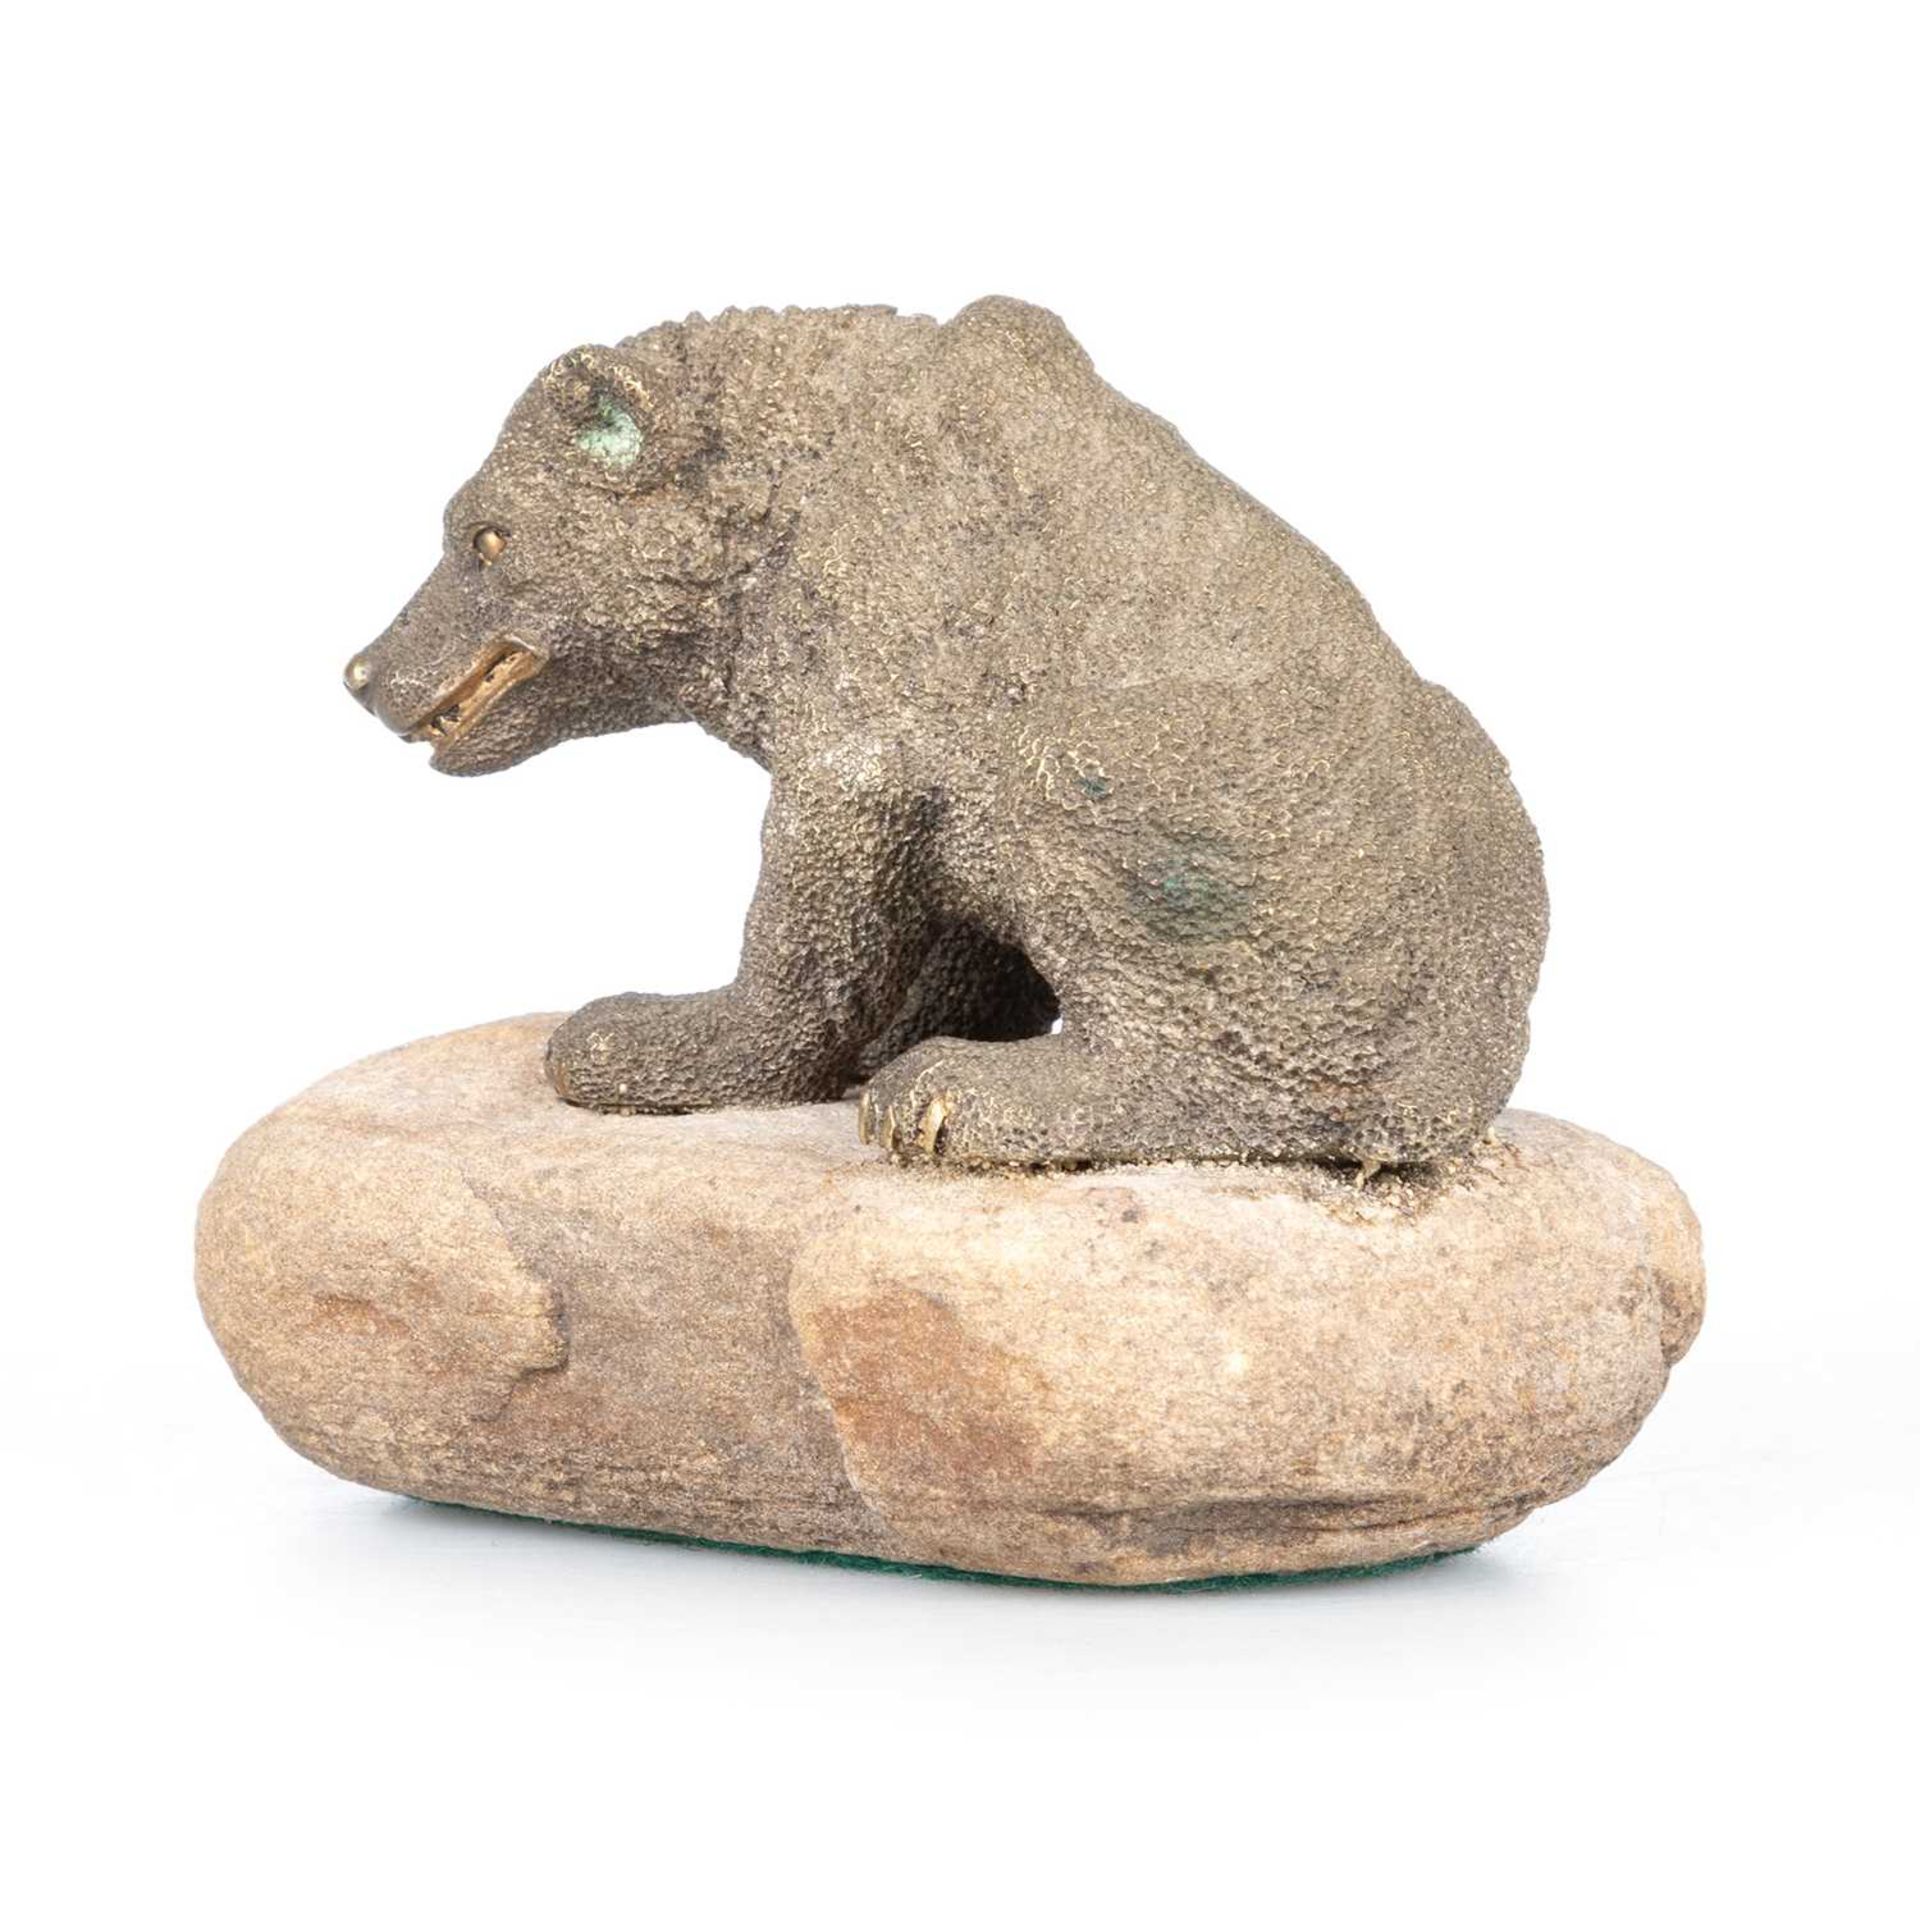 A RUSSIAN GILT-BRONZE FIGURE OF A BEAR, LATE 19TH CENTURY - Image 2 of 2